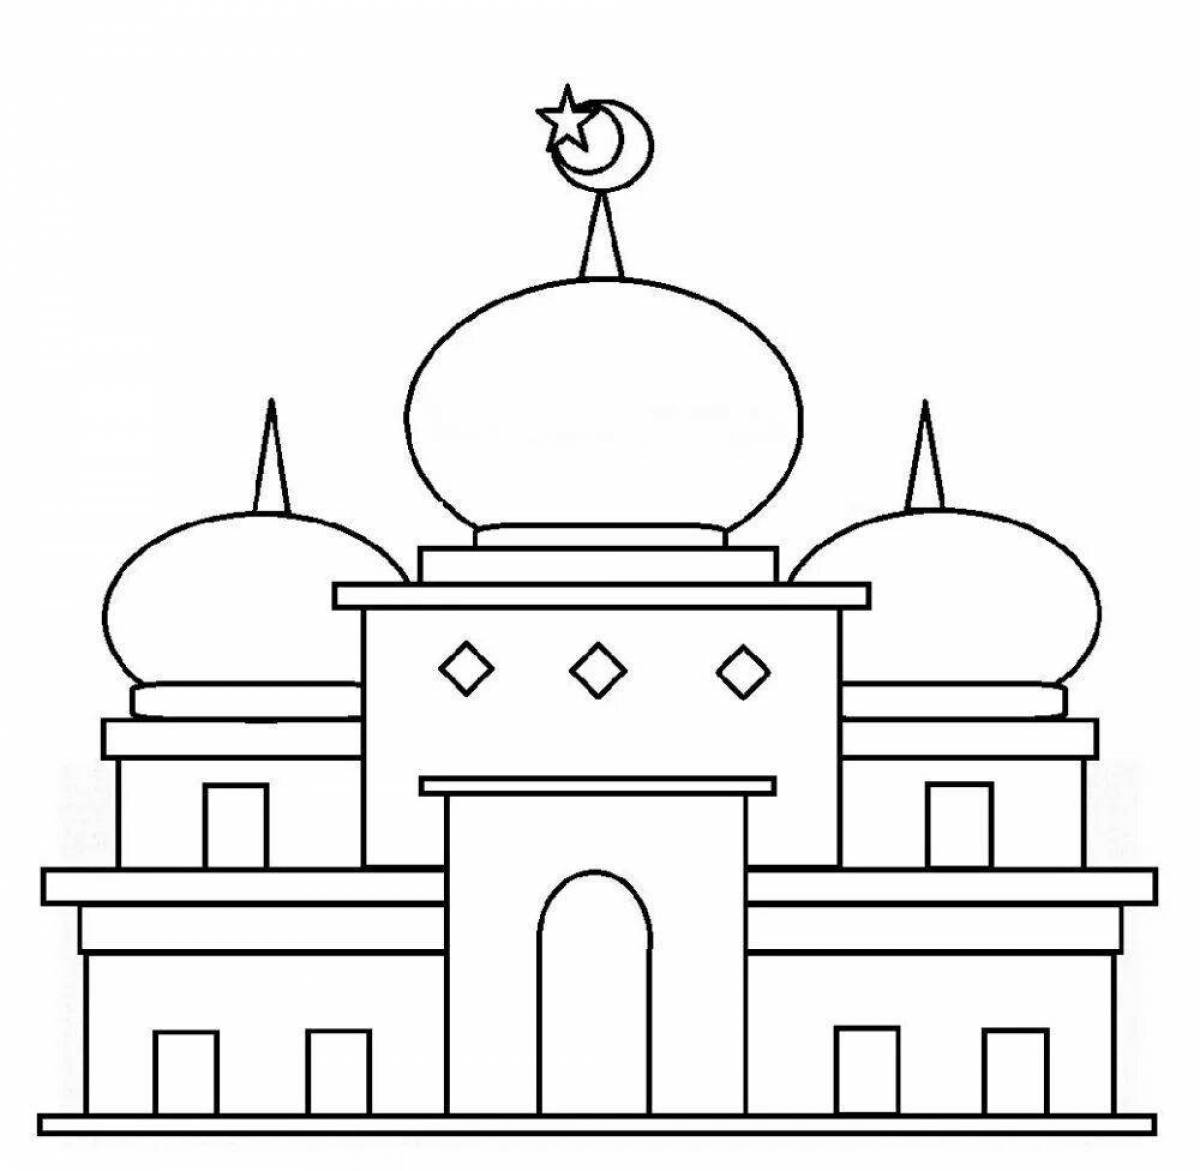 Exquisite mosque coloring book for kids